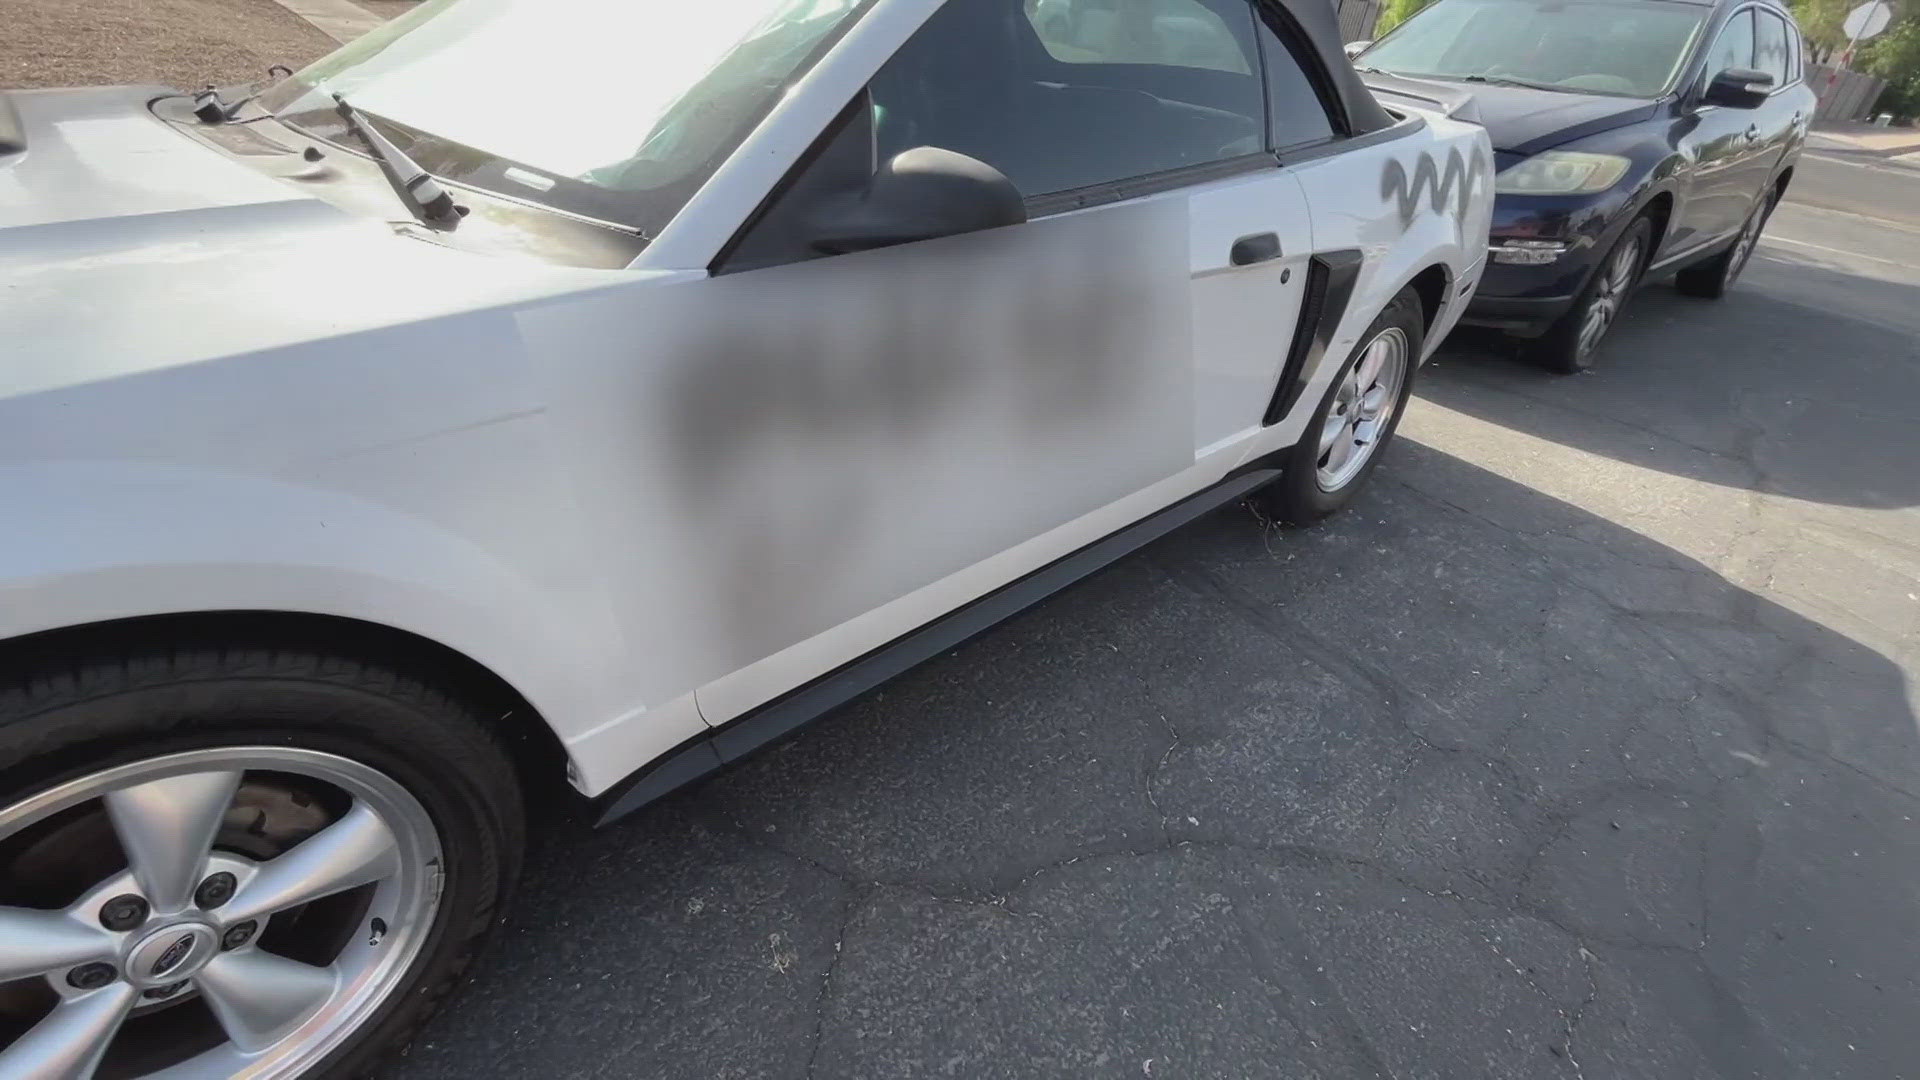 Phoenix police are investigating four separate incidents where cars and property were tagged with swastikas and other hate speech on Wednesday